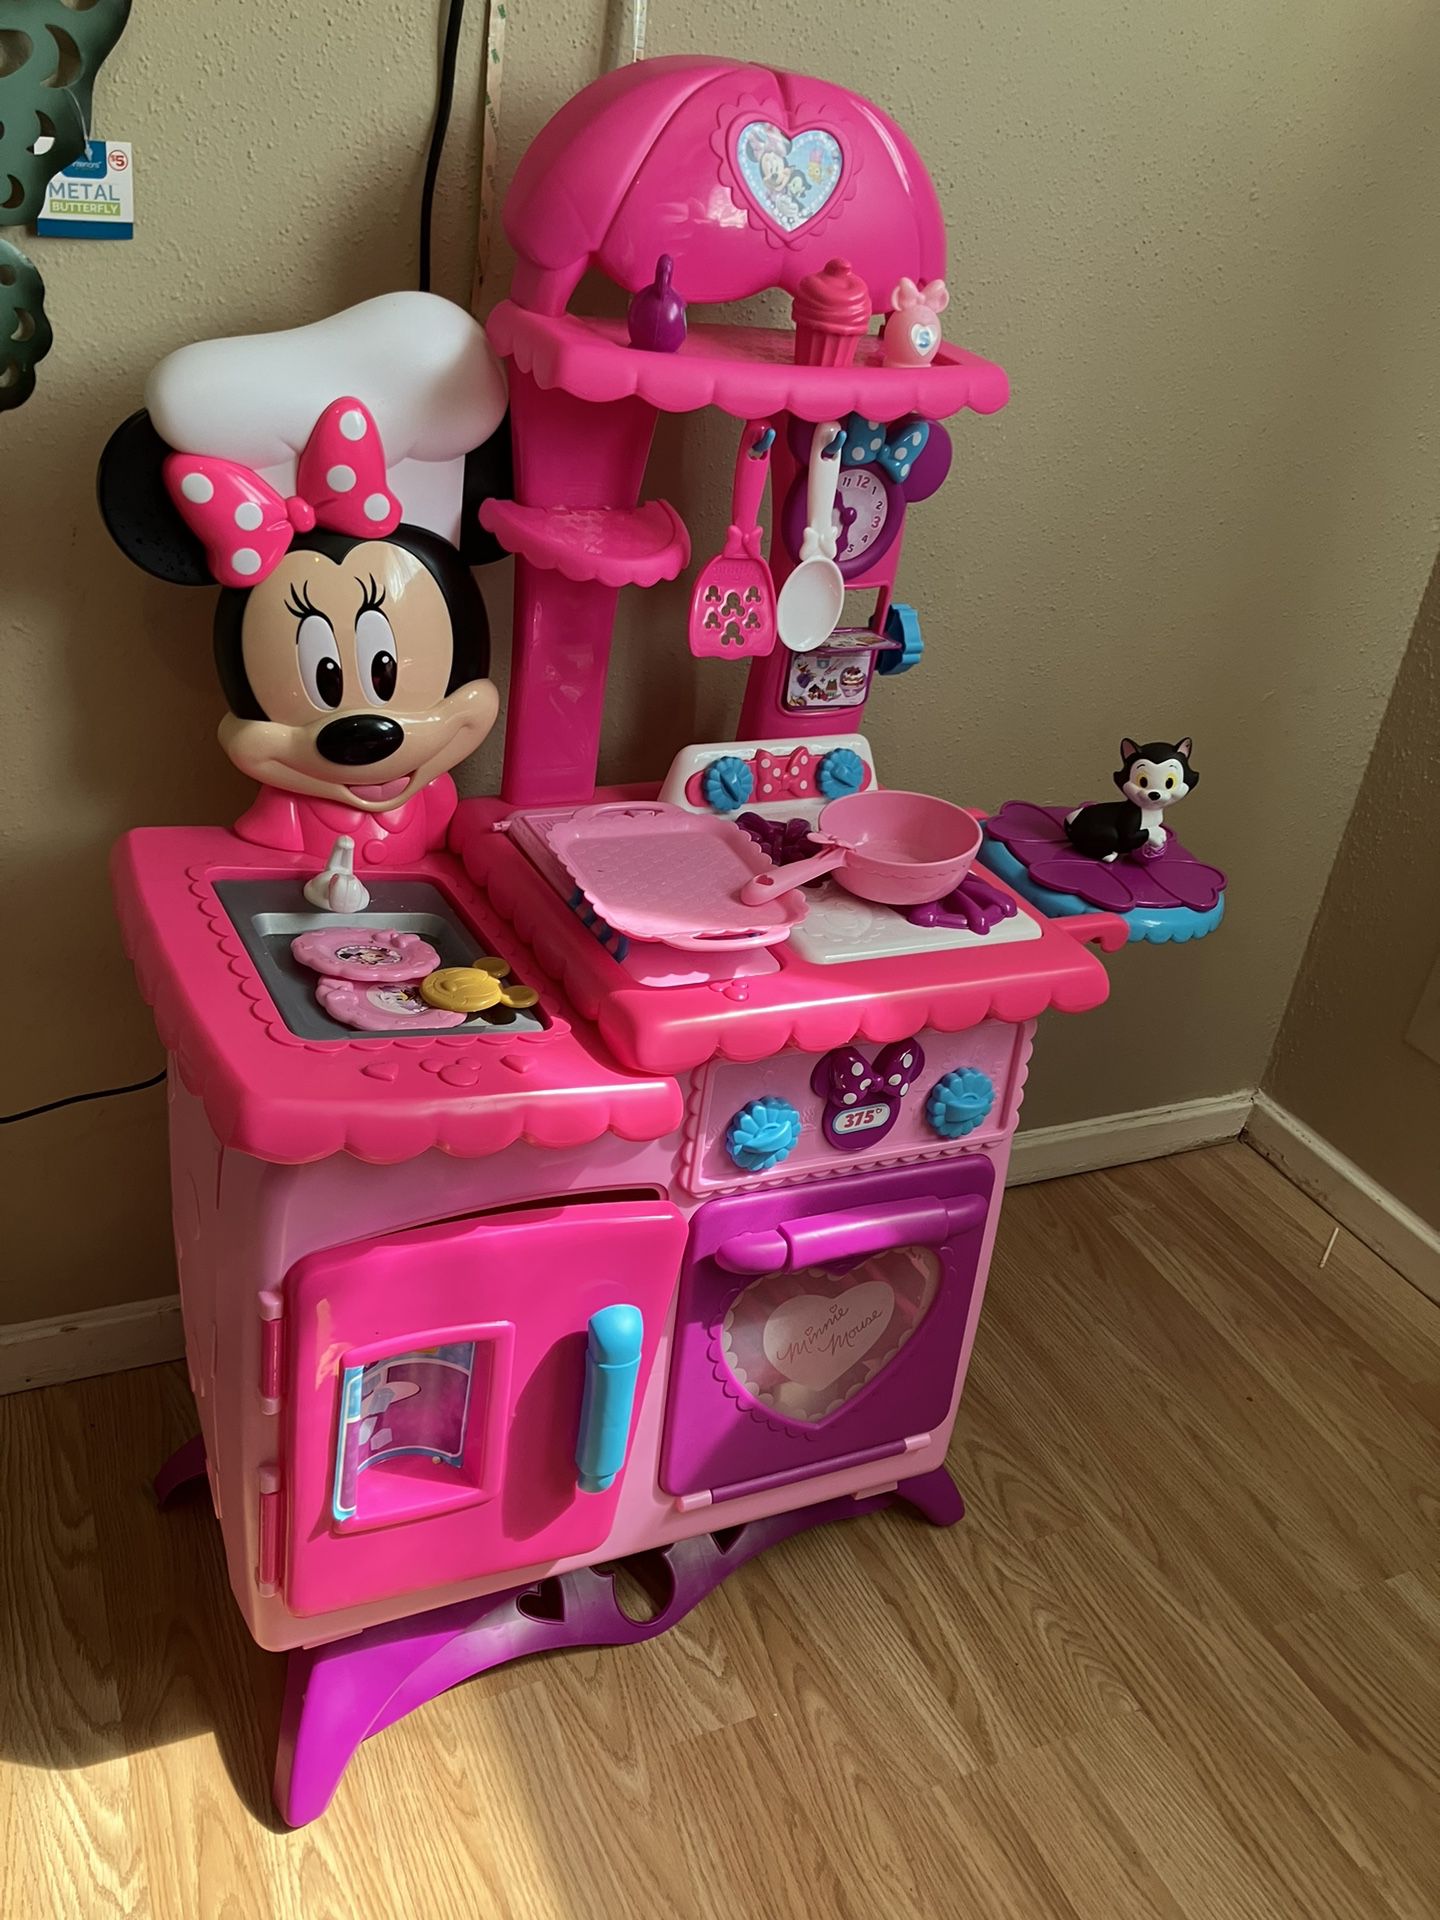 Minnin Mouse Kitchen Accessories for Sale in Arcadia, CA - OfferUp